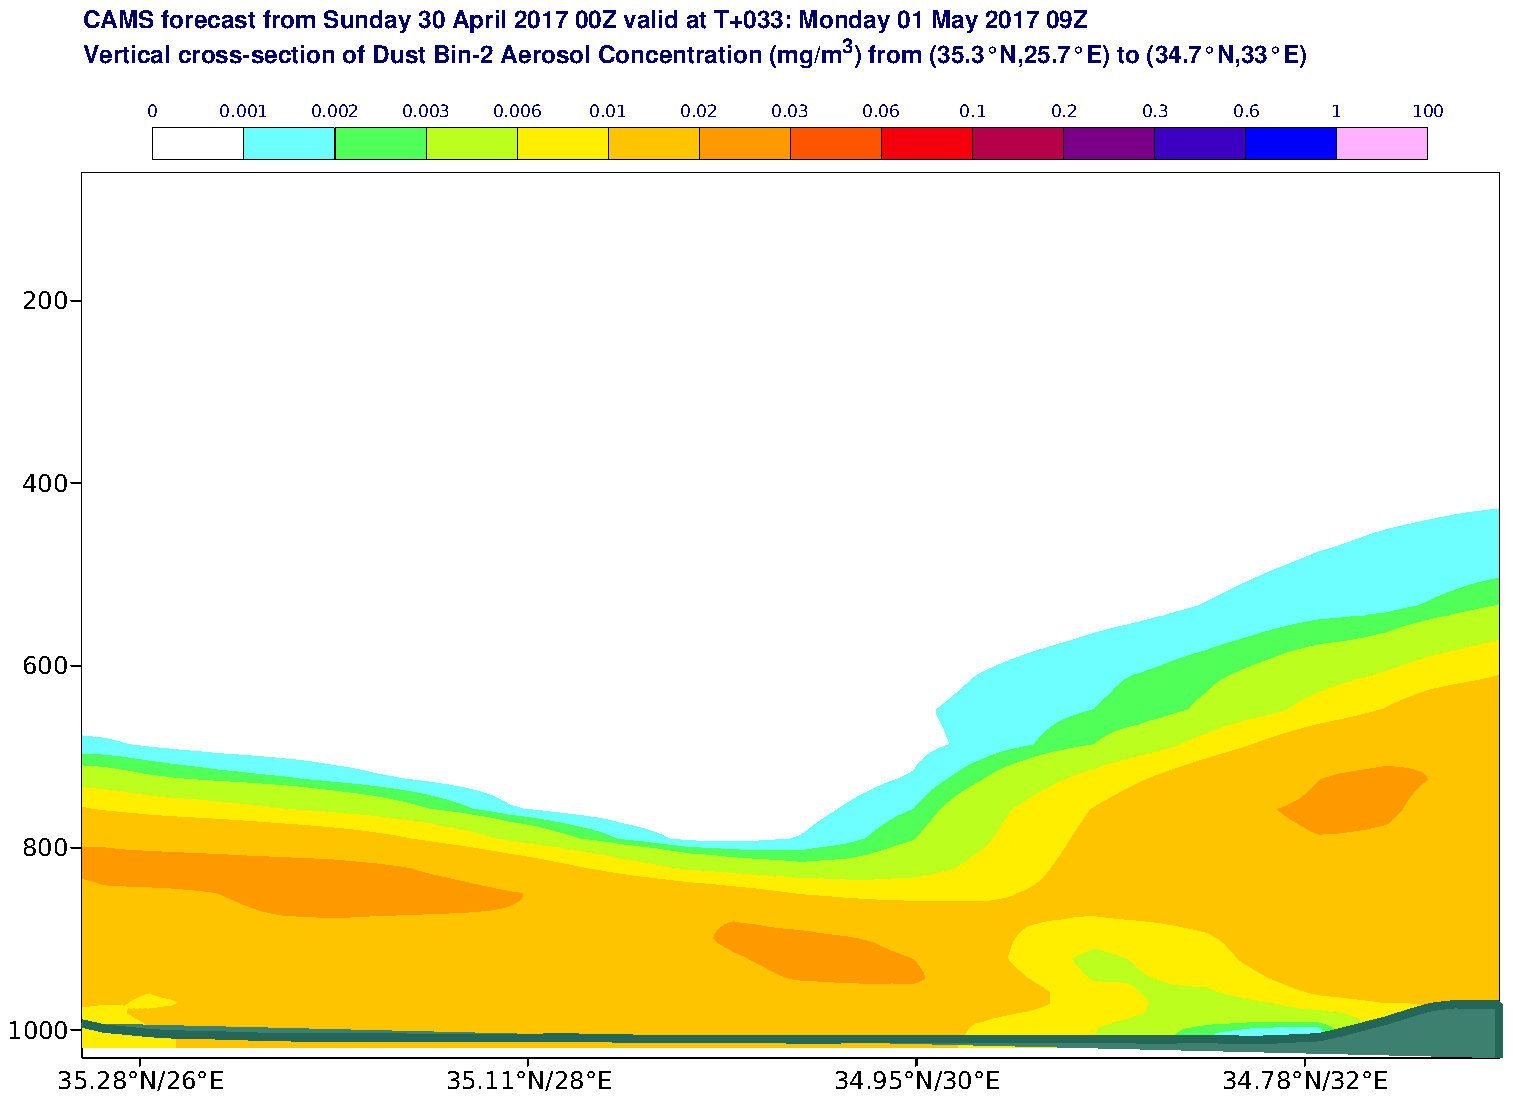 Vertical cross-section of Dust Bin-2 Aerosol Concentration (mg/m3) valid at T33 - 2017-05-01 09:00